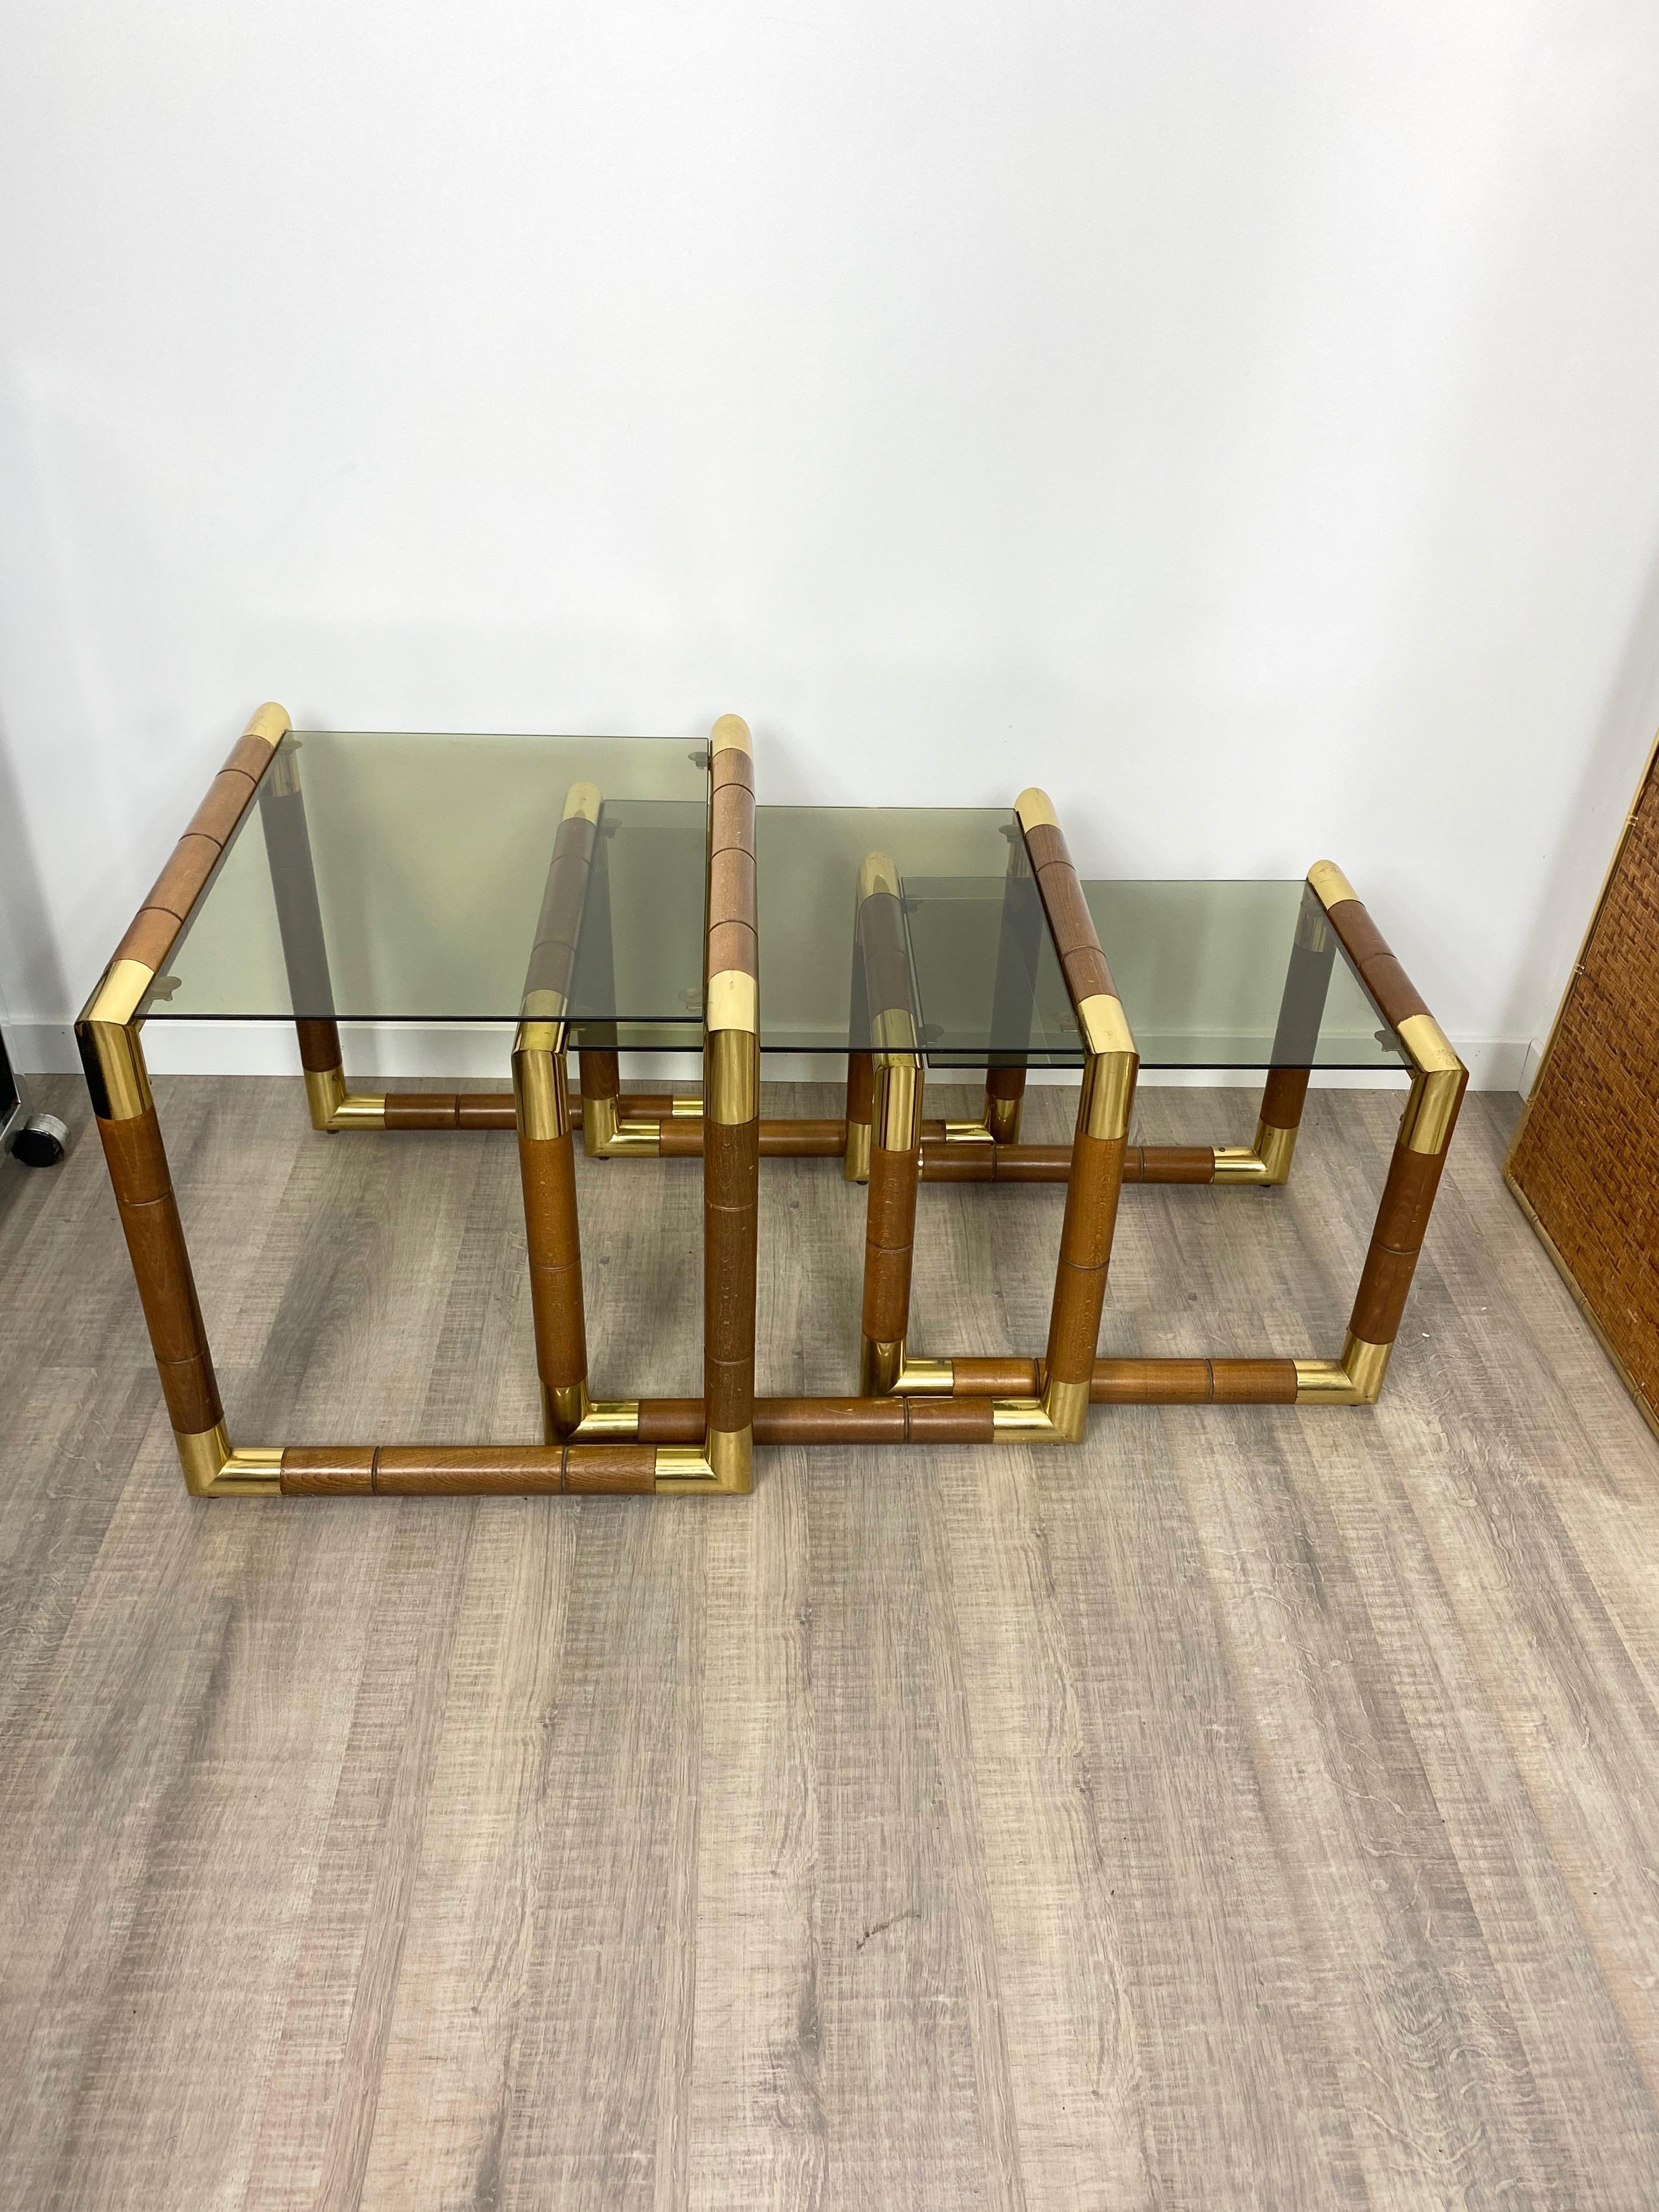 Set of Nesting Table in Wood, Brass and Glass, Italy, 1970s For Sale 9